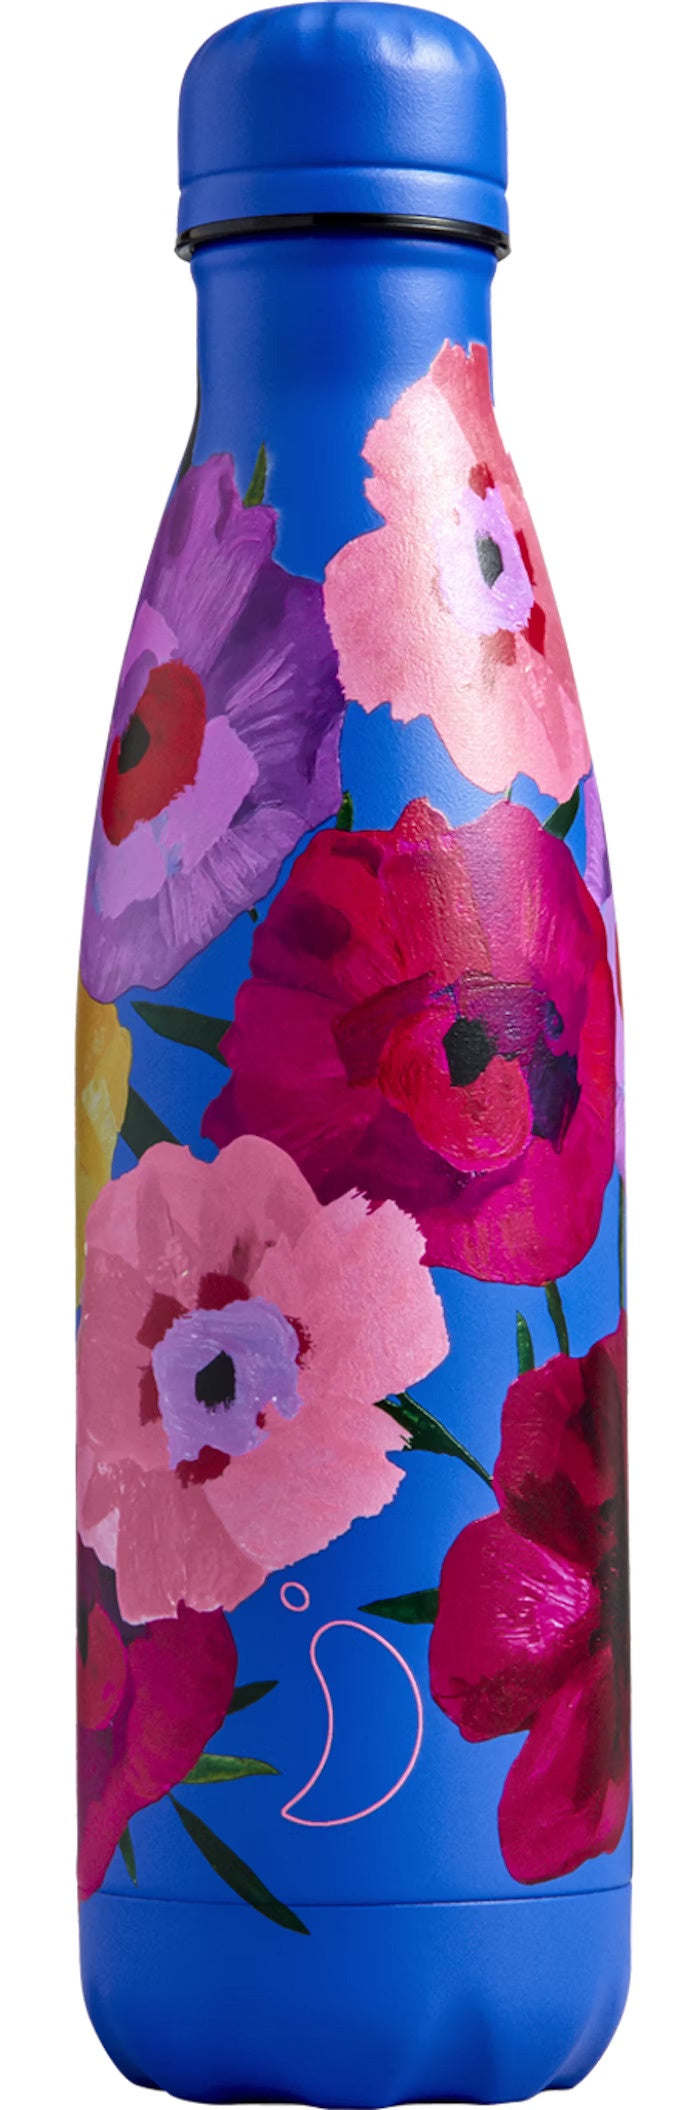 Chilly's Water Bottle - Maxi Poppy